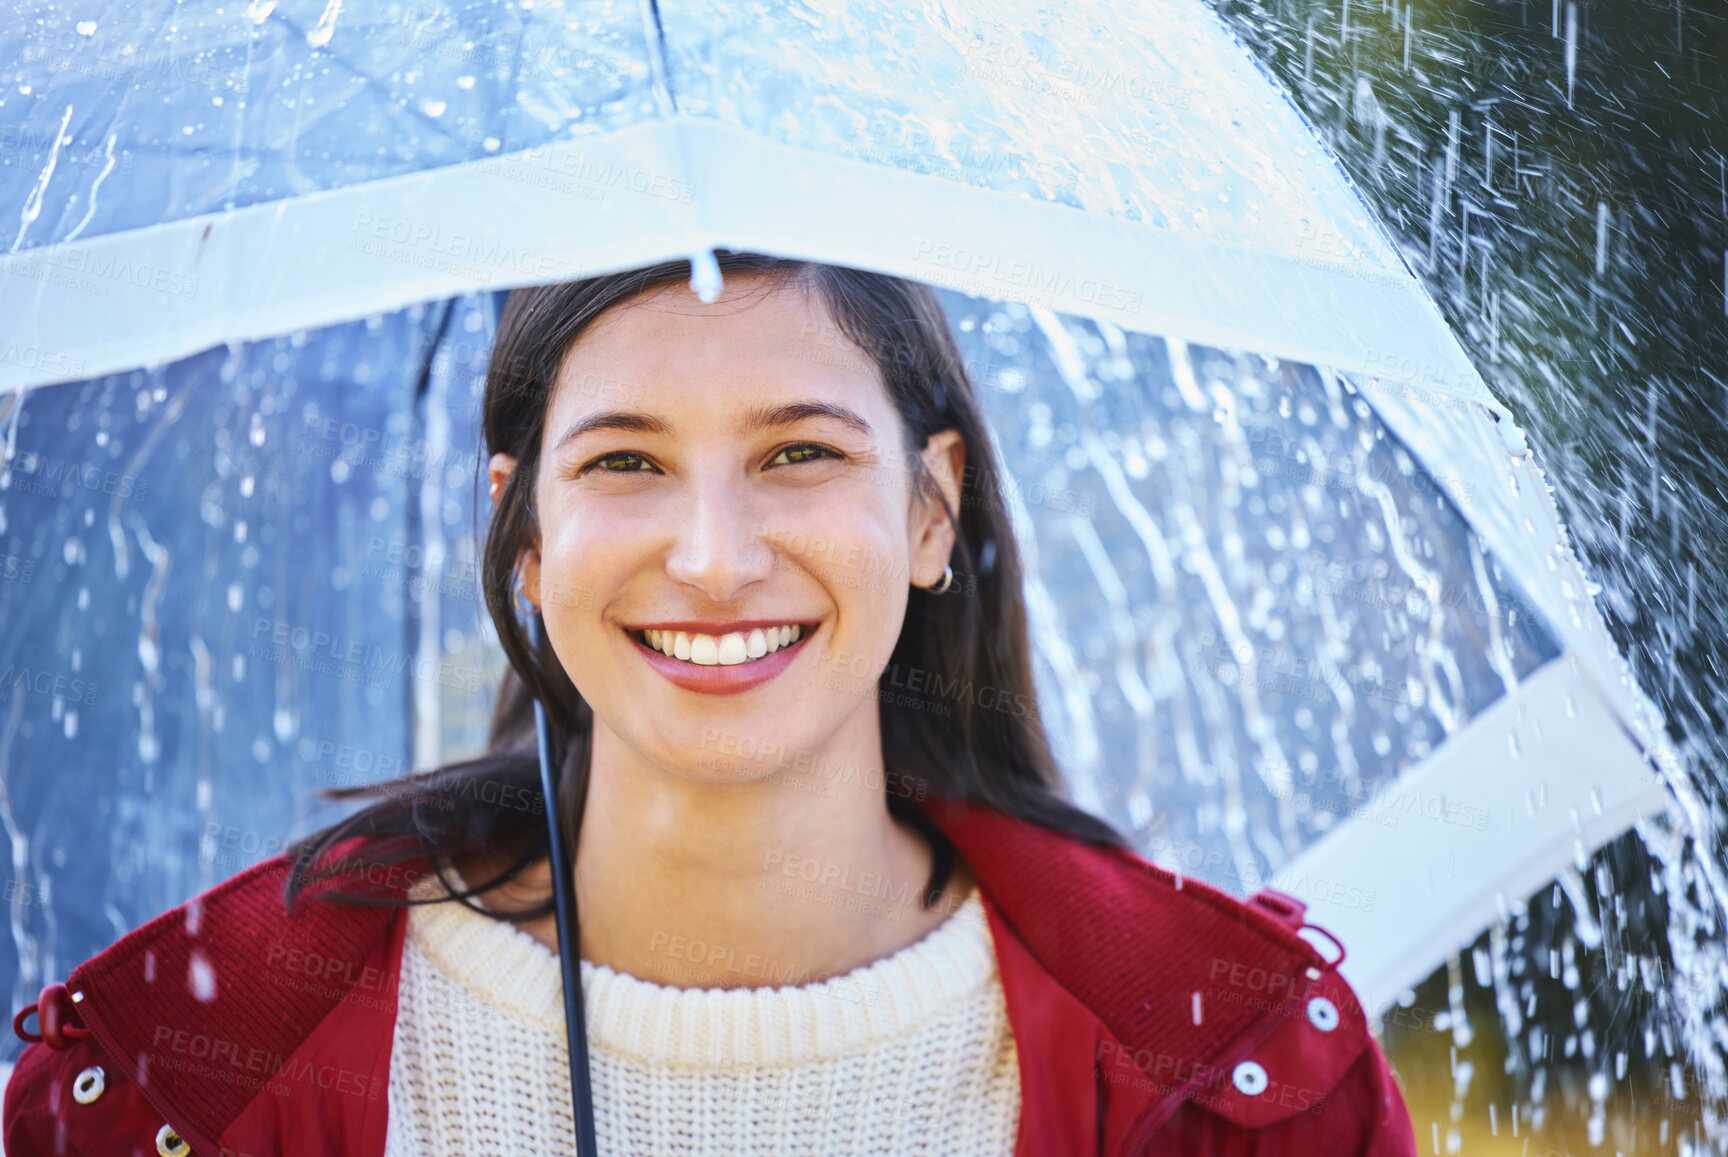 Buy stock photo Shot of a young woman holding an umbrella in the rain outside